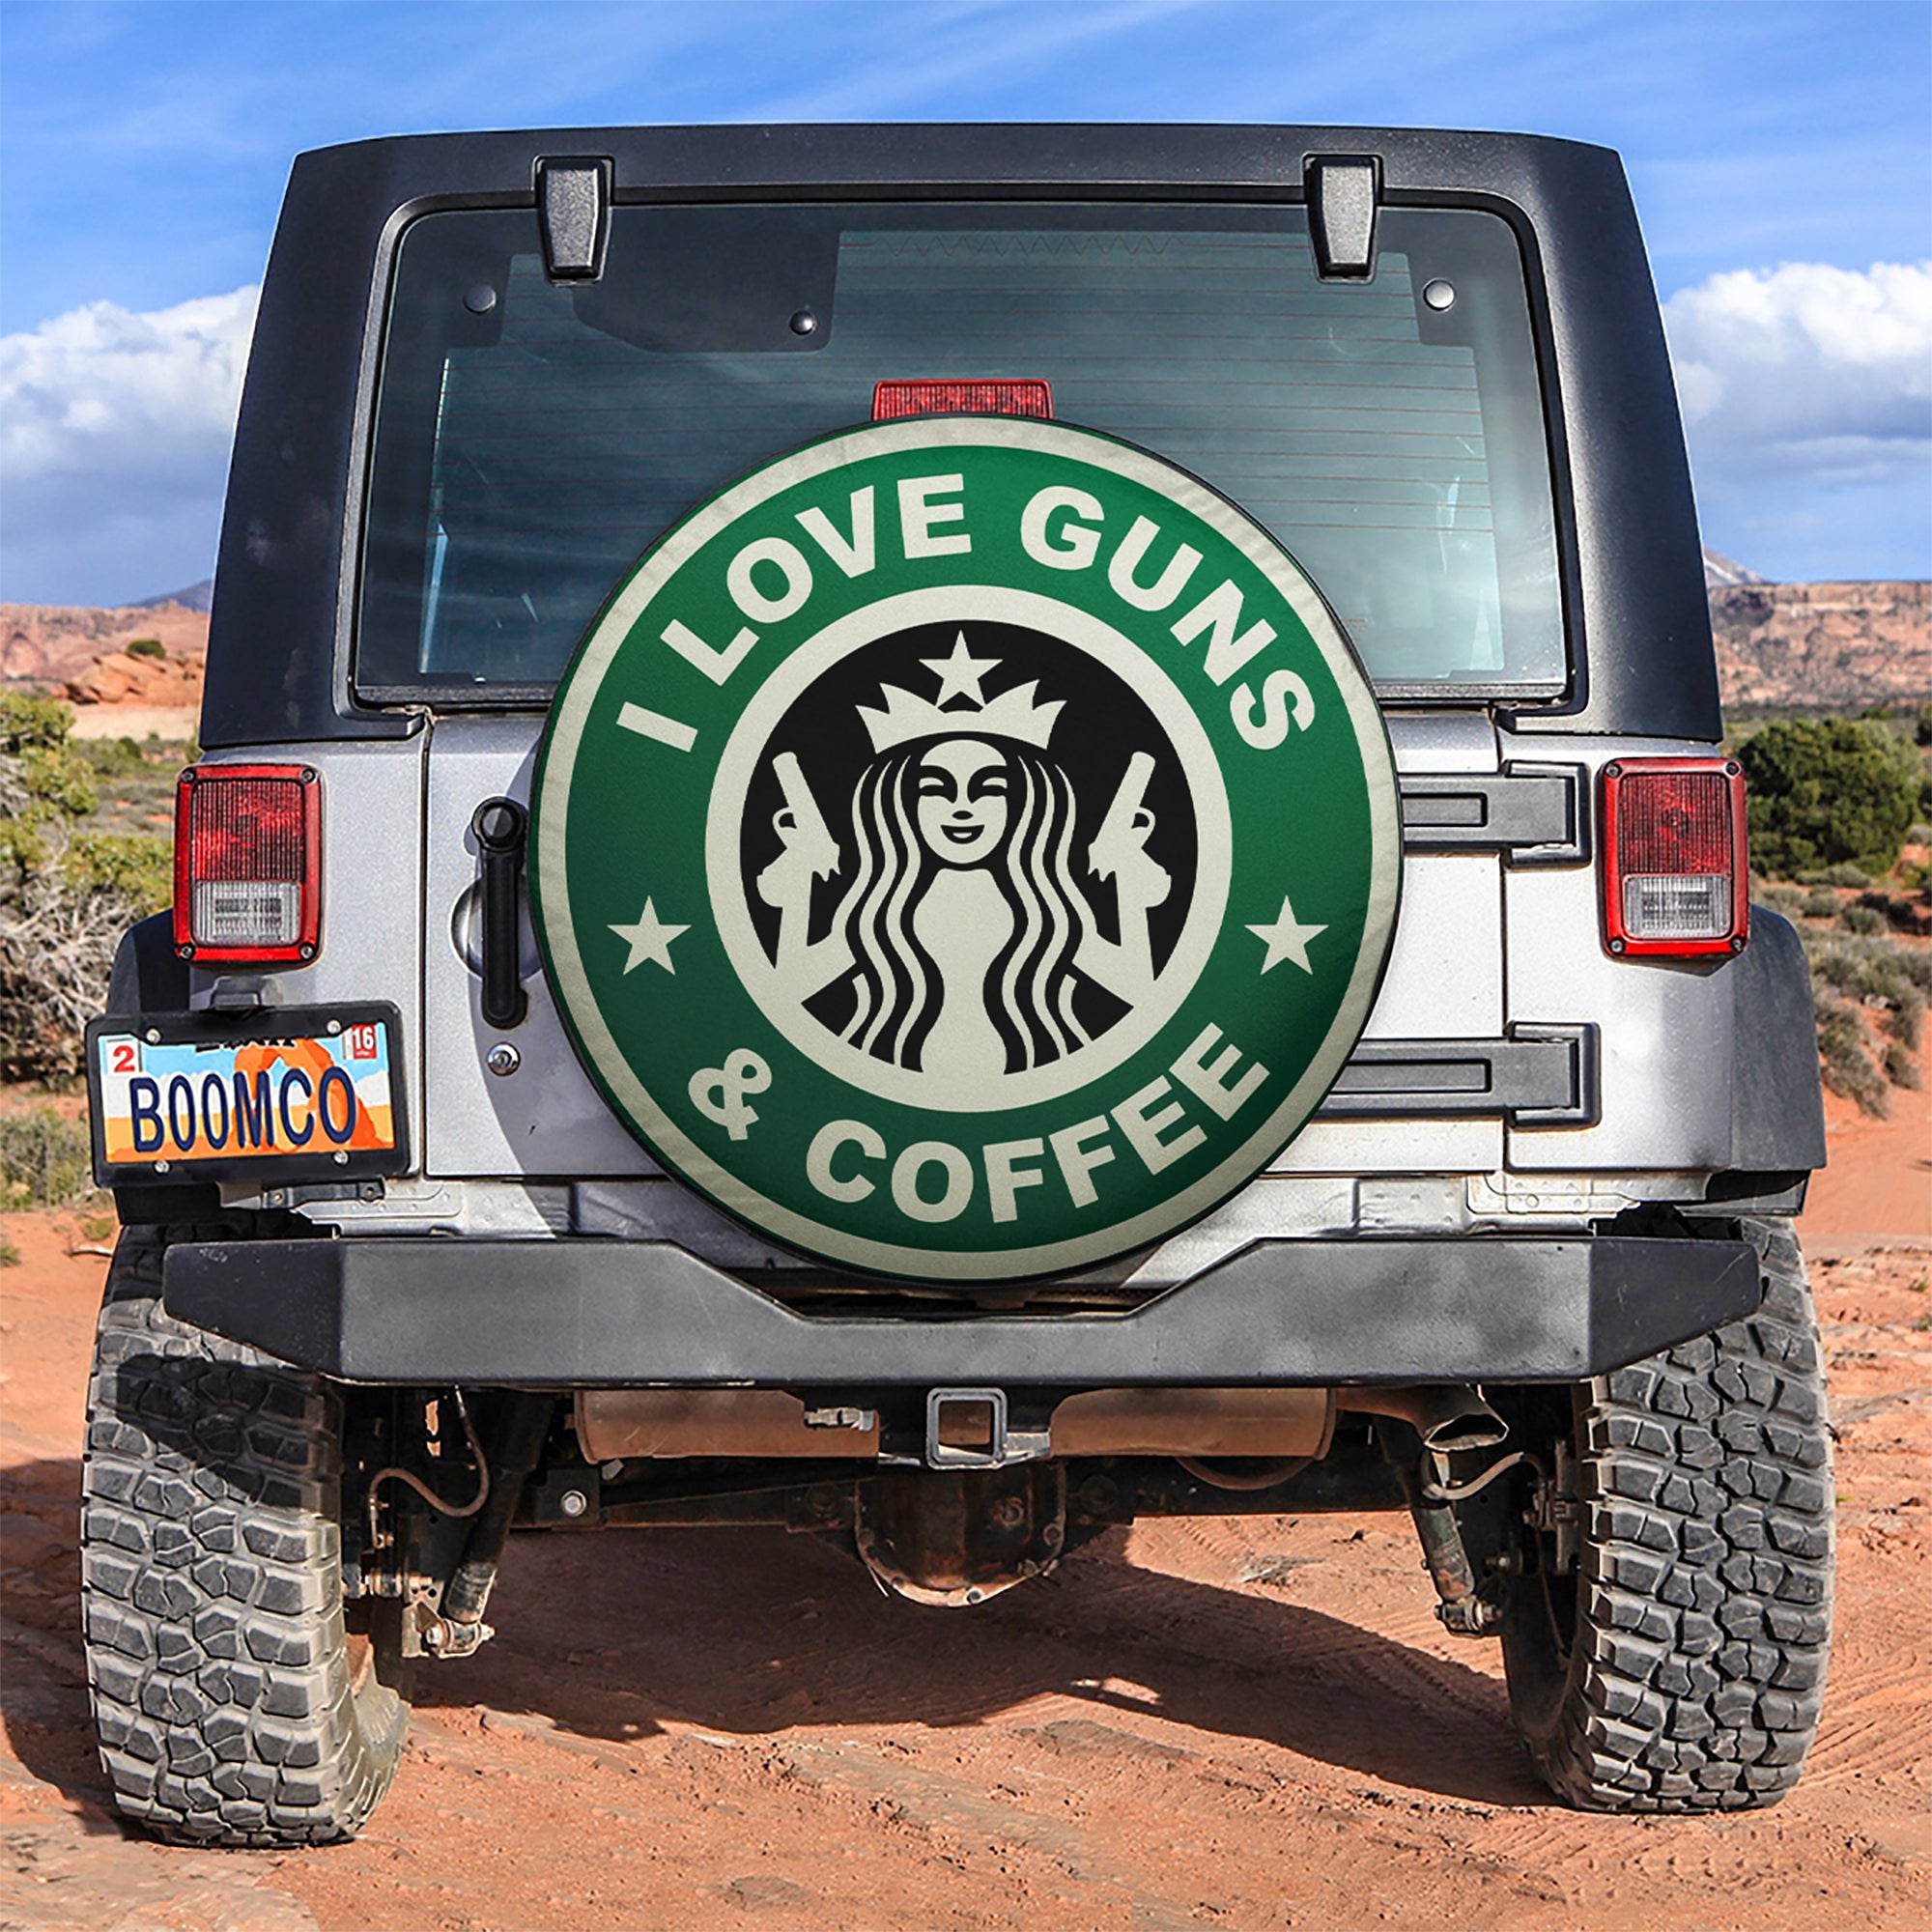 Coffee Funny Mermaid Car Spare Tire Covers Gift For Campers Nearkii